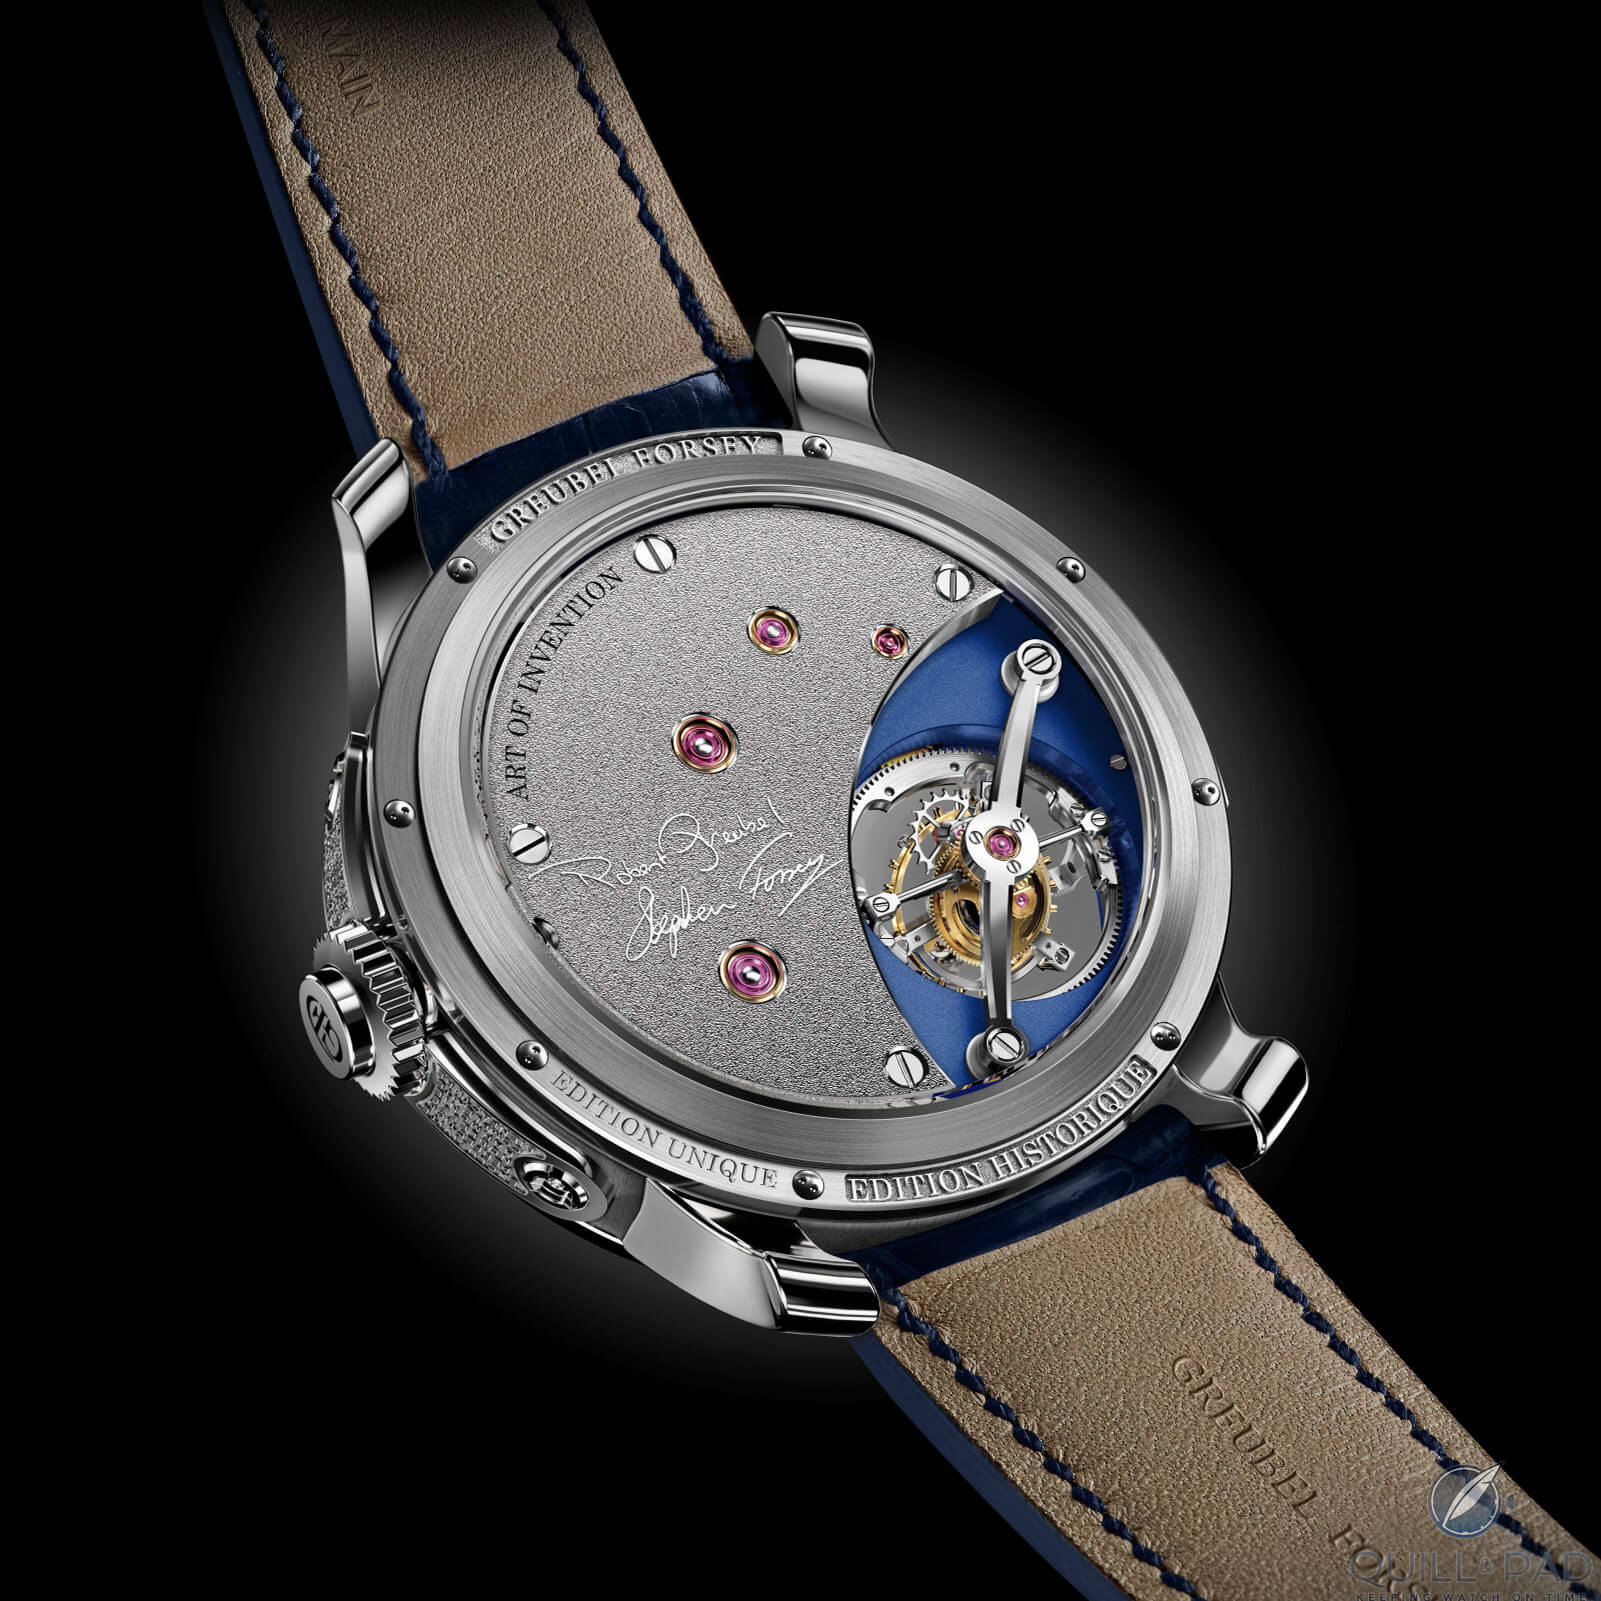 Back of the Greubel Forsey Art Piece Edition Historique